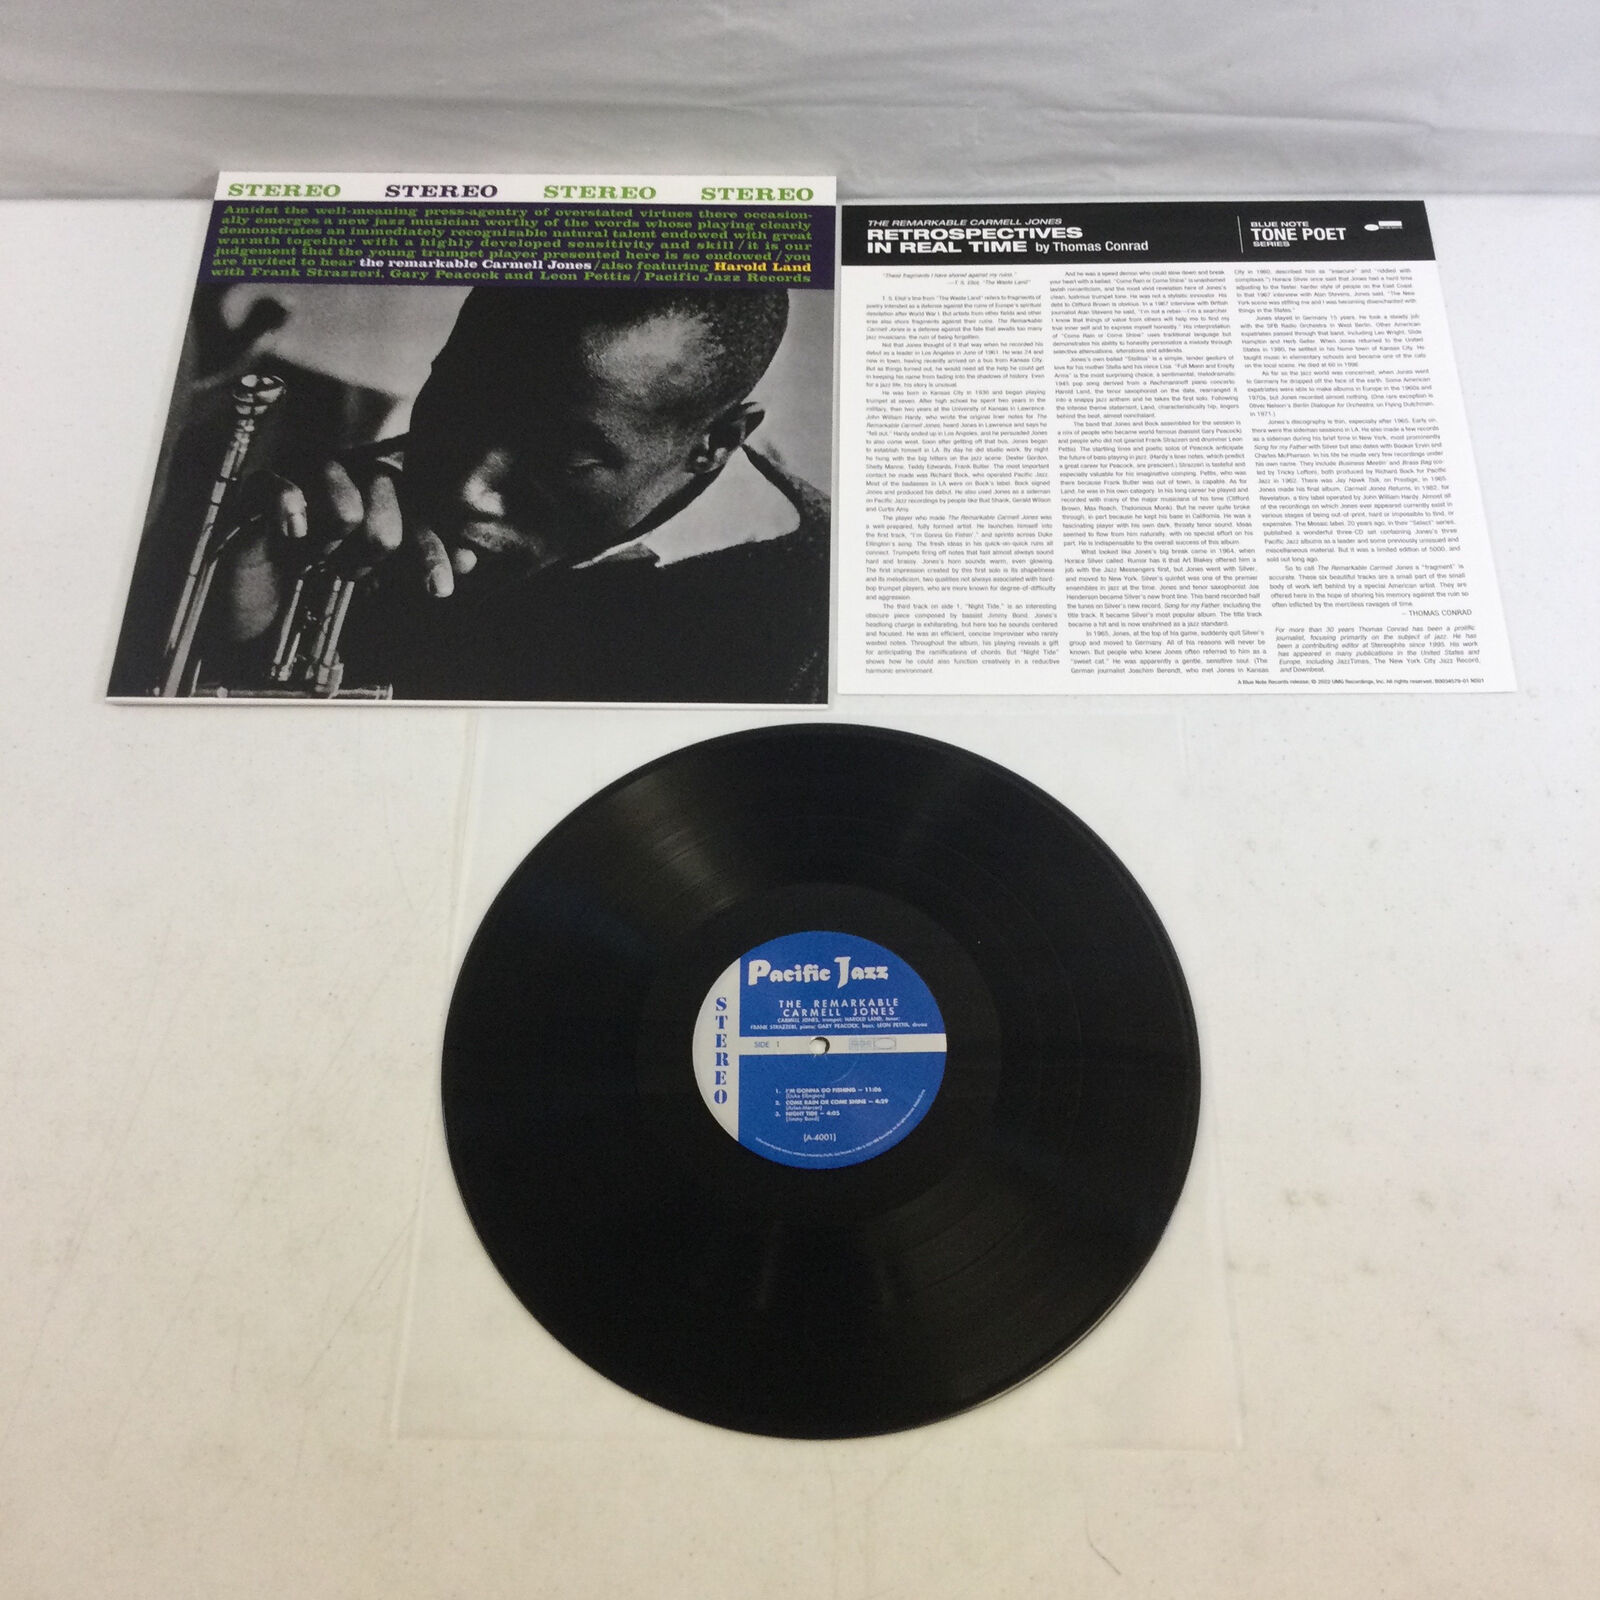 Blue Note Records The Remarkable Carmell Jones LP Vinyl Record Used